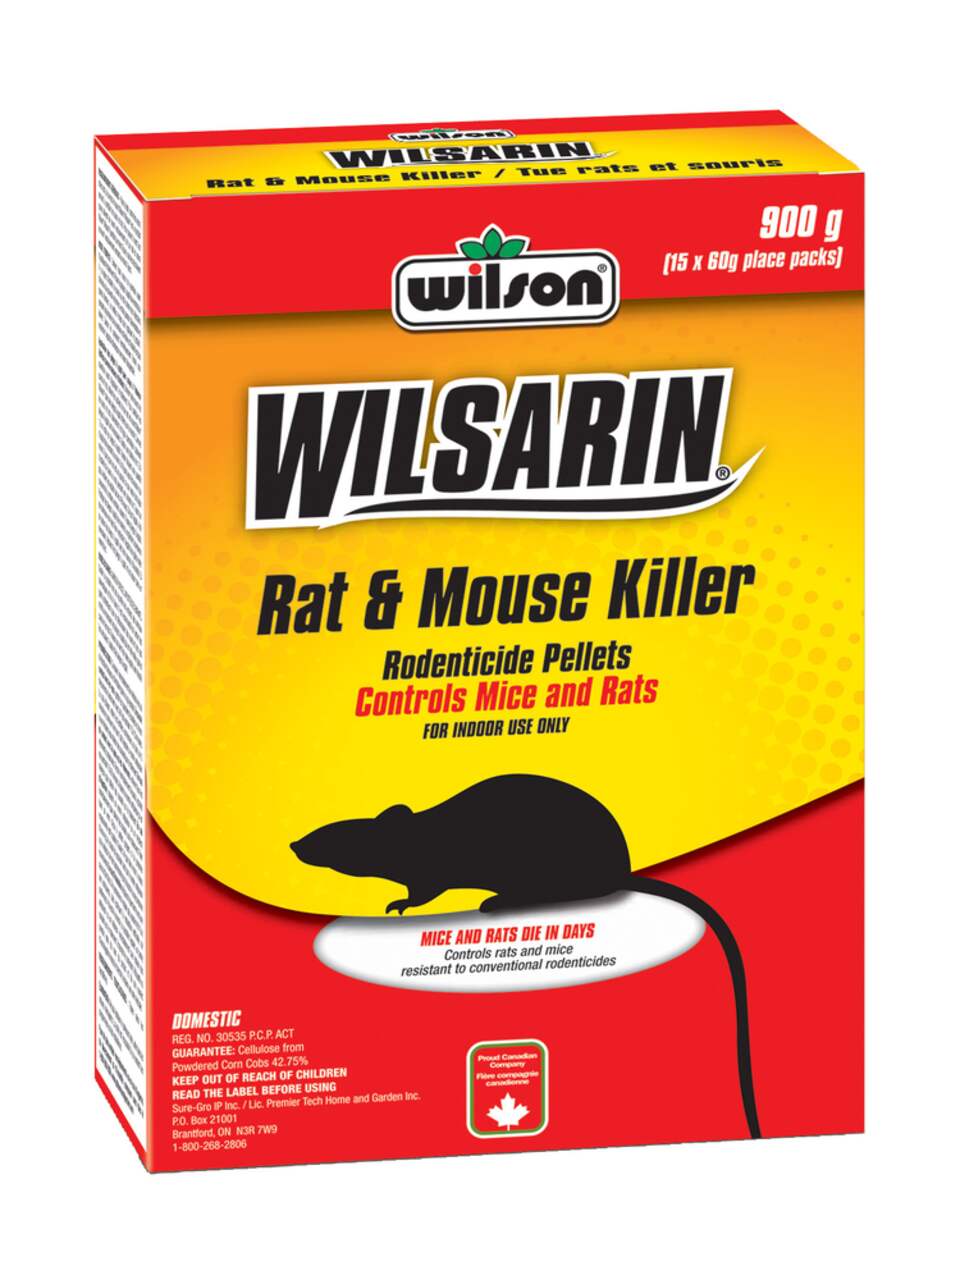 Place Around the Wilson HardWood Bait to Trap Rodents